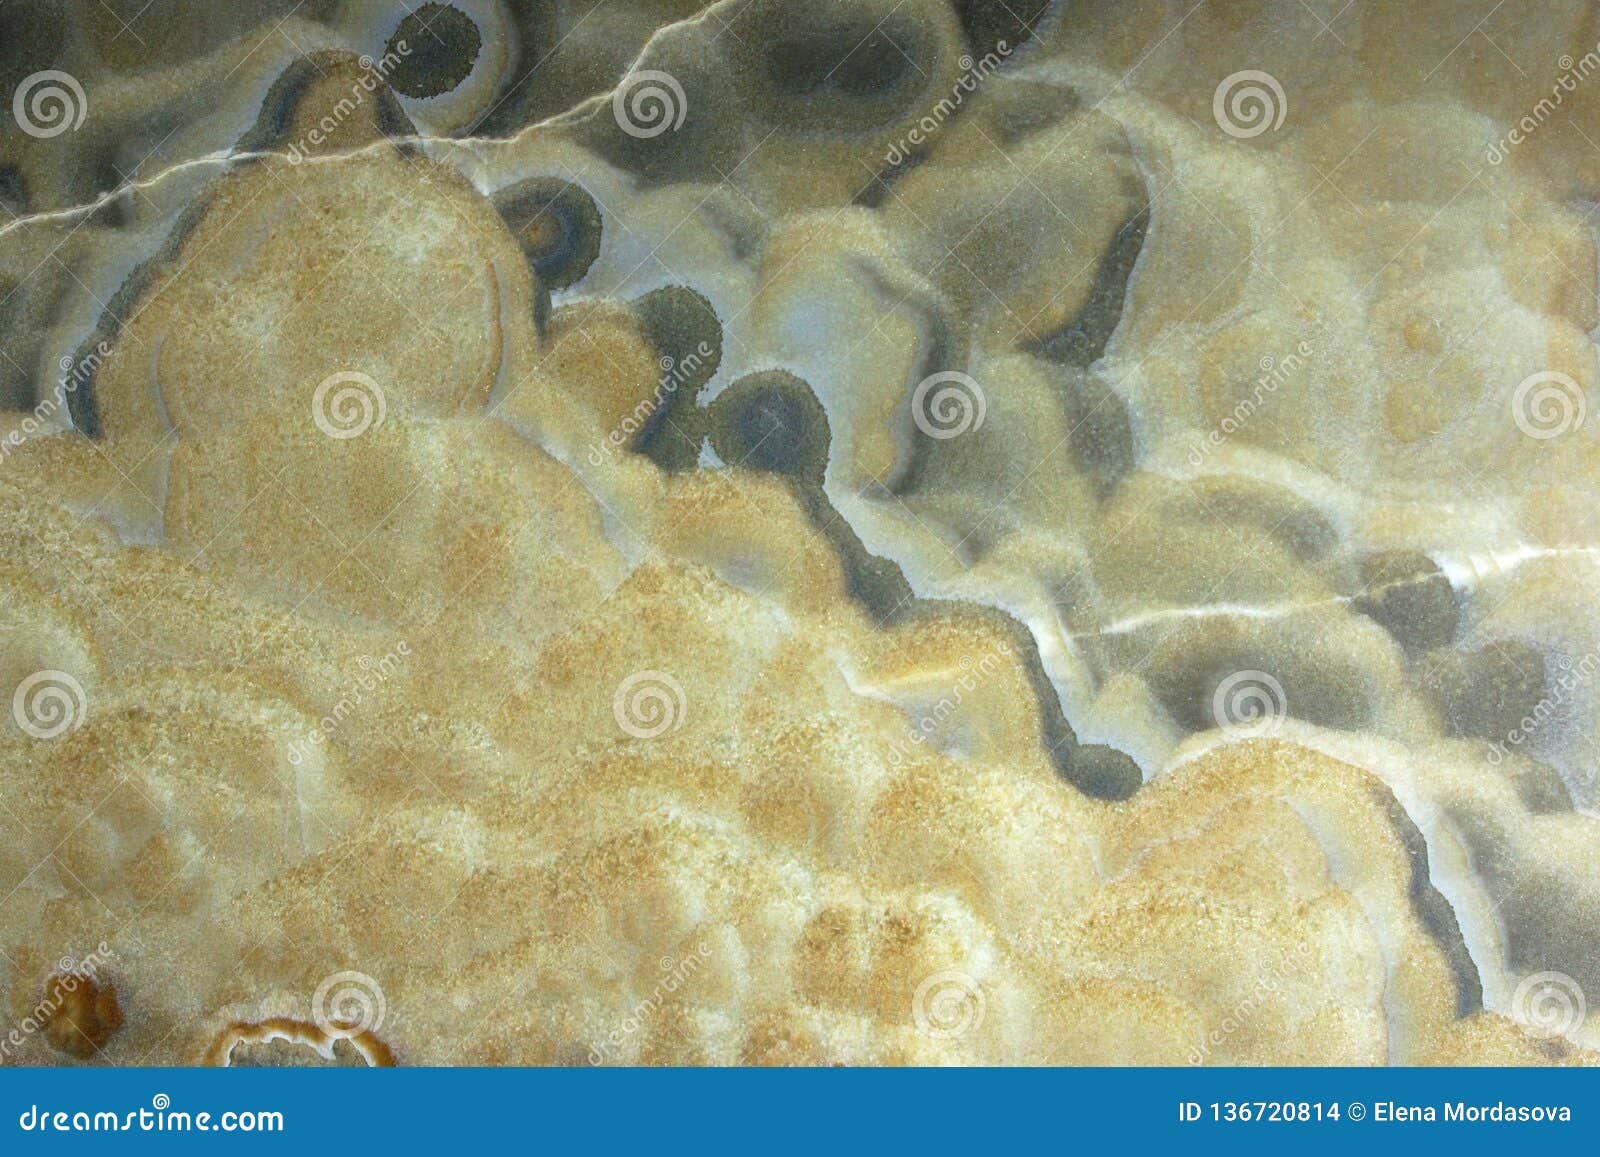 background from a light natural stone onyx with bubbles and gray stains on the surface, onix naranja veteado